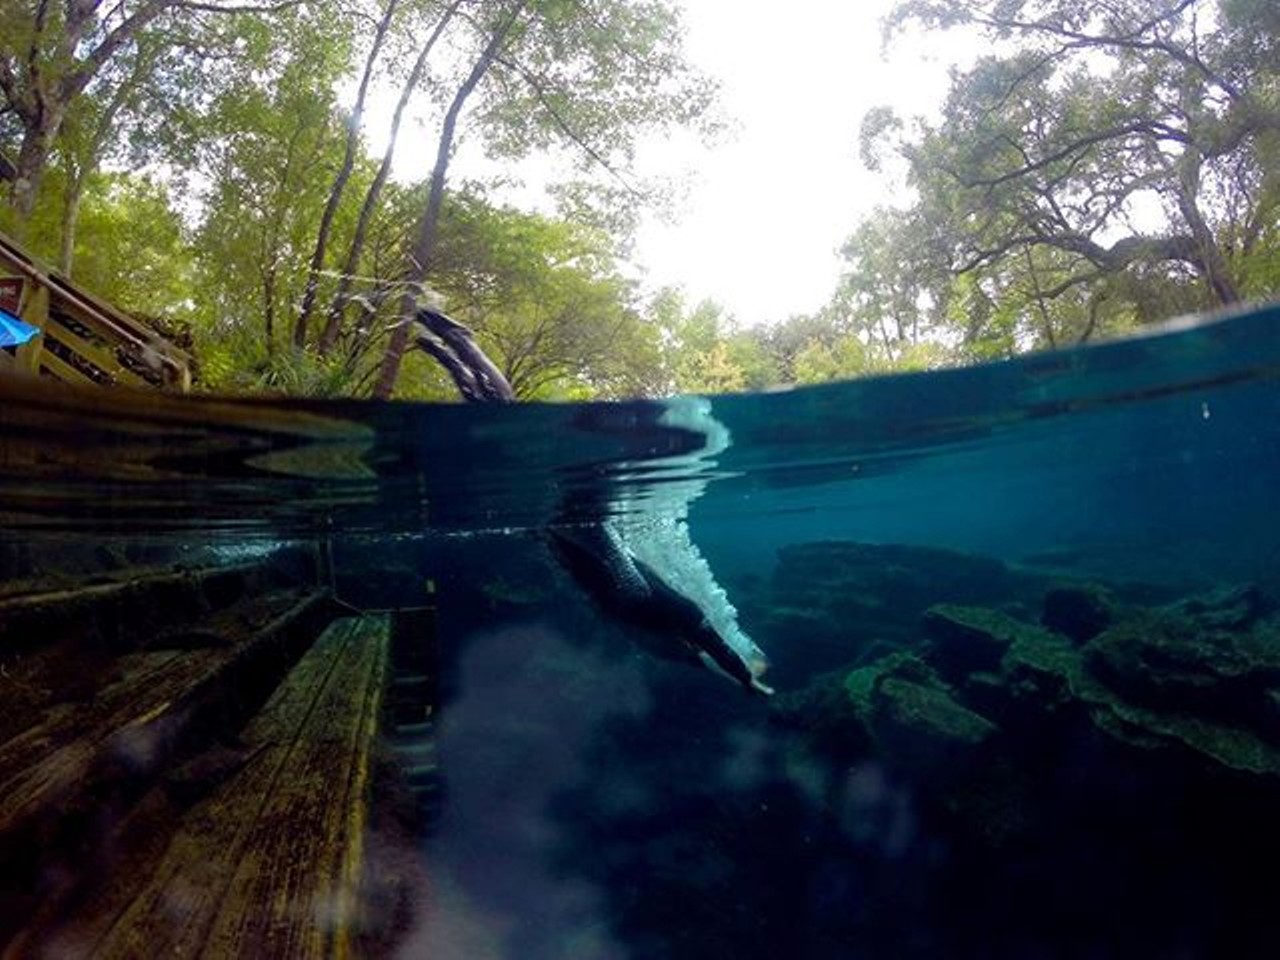 Wes Skiles Peacock Springs State Park
18081 185th Road, Live Oak, FL 32060
Estimated travel time: 2 hours, 54 minutes from Orlando
Home to one of the nation&#146;s largest underwater cave systems, Peacock Springs also has an award winning natural trail. Guests can go swimming and snorkeling in the two springs and six sinkholes too.
Photo via calibreann_/Instagram